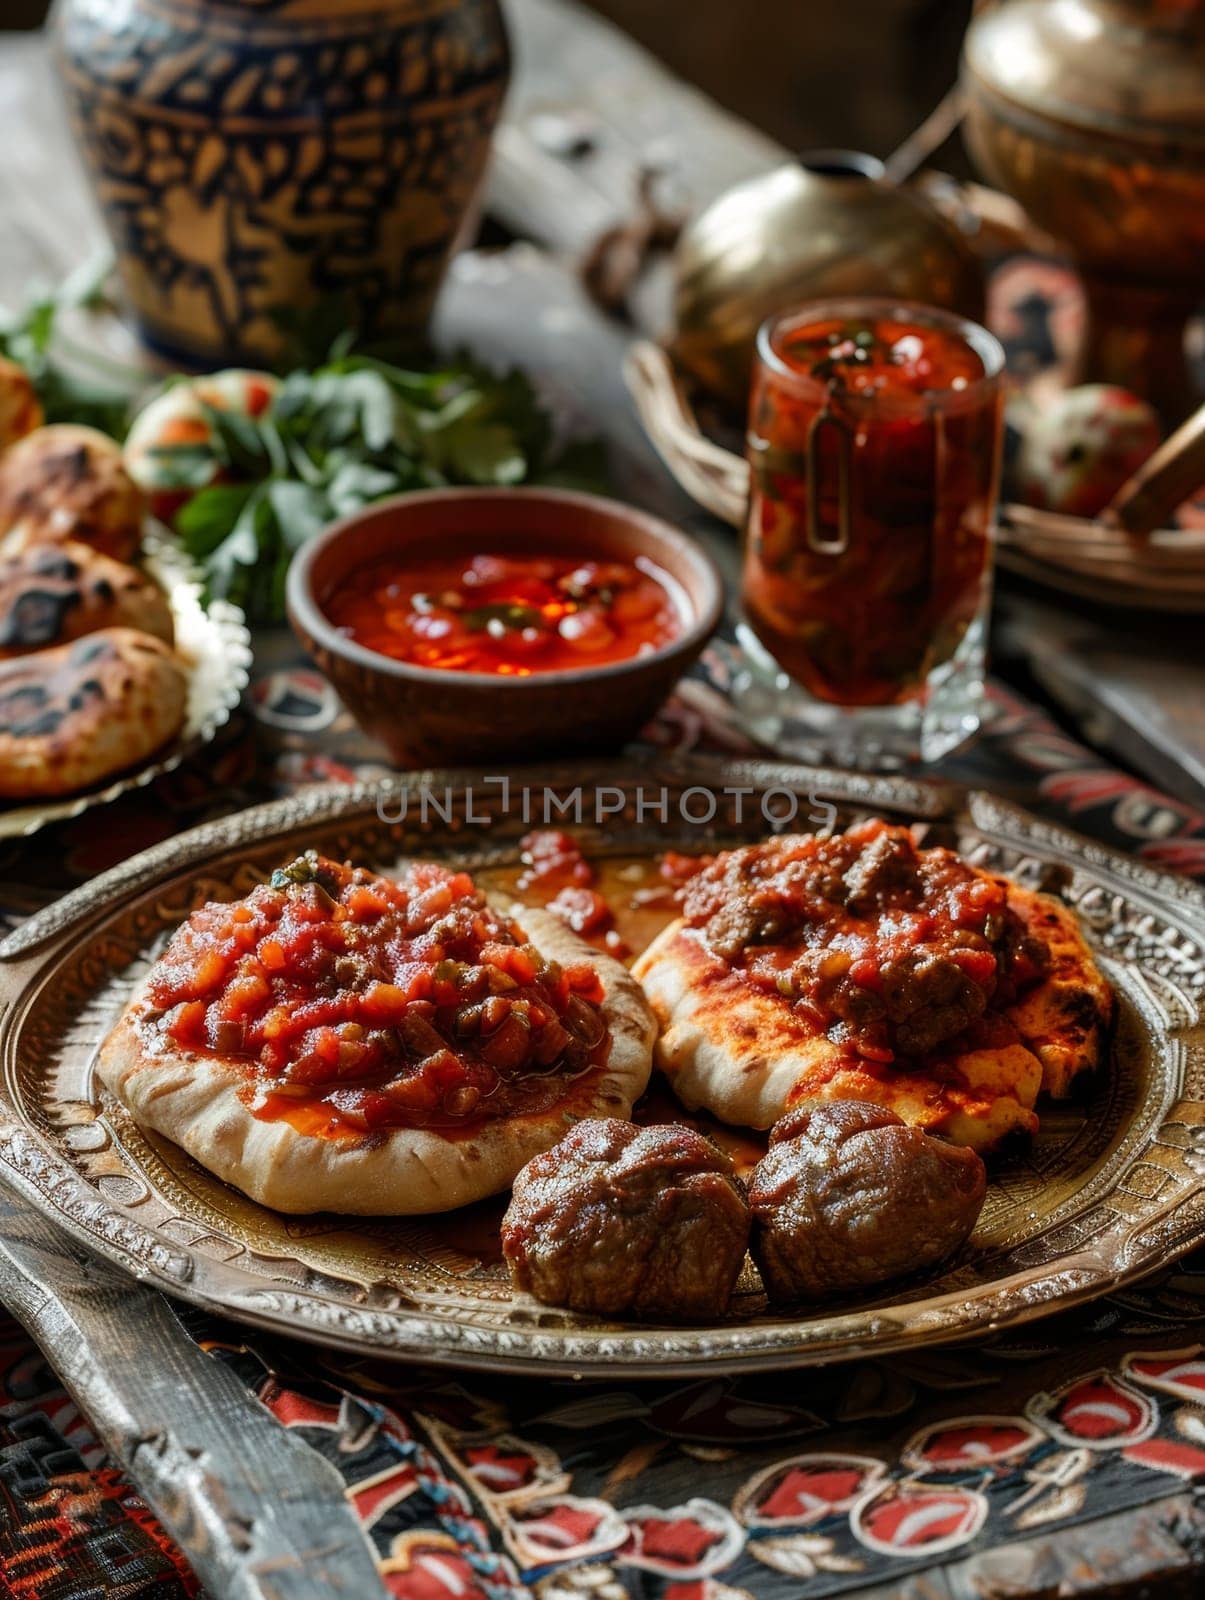 Libyan bazin, a hard dough served with a spicy tomato sauce and meat, presented on a traditional serving tray. This rustic and satisfying dish reflects the unique culinary heritage of North Africa. by sfinks